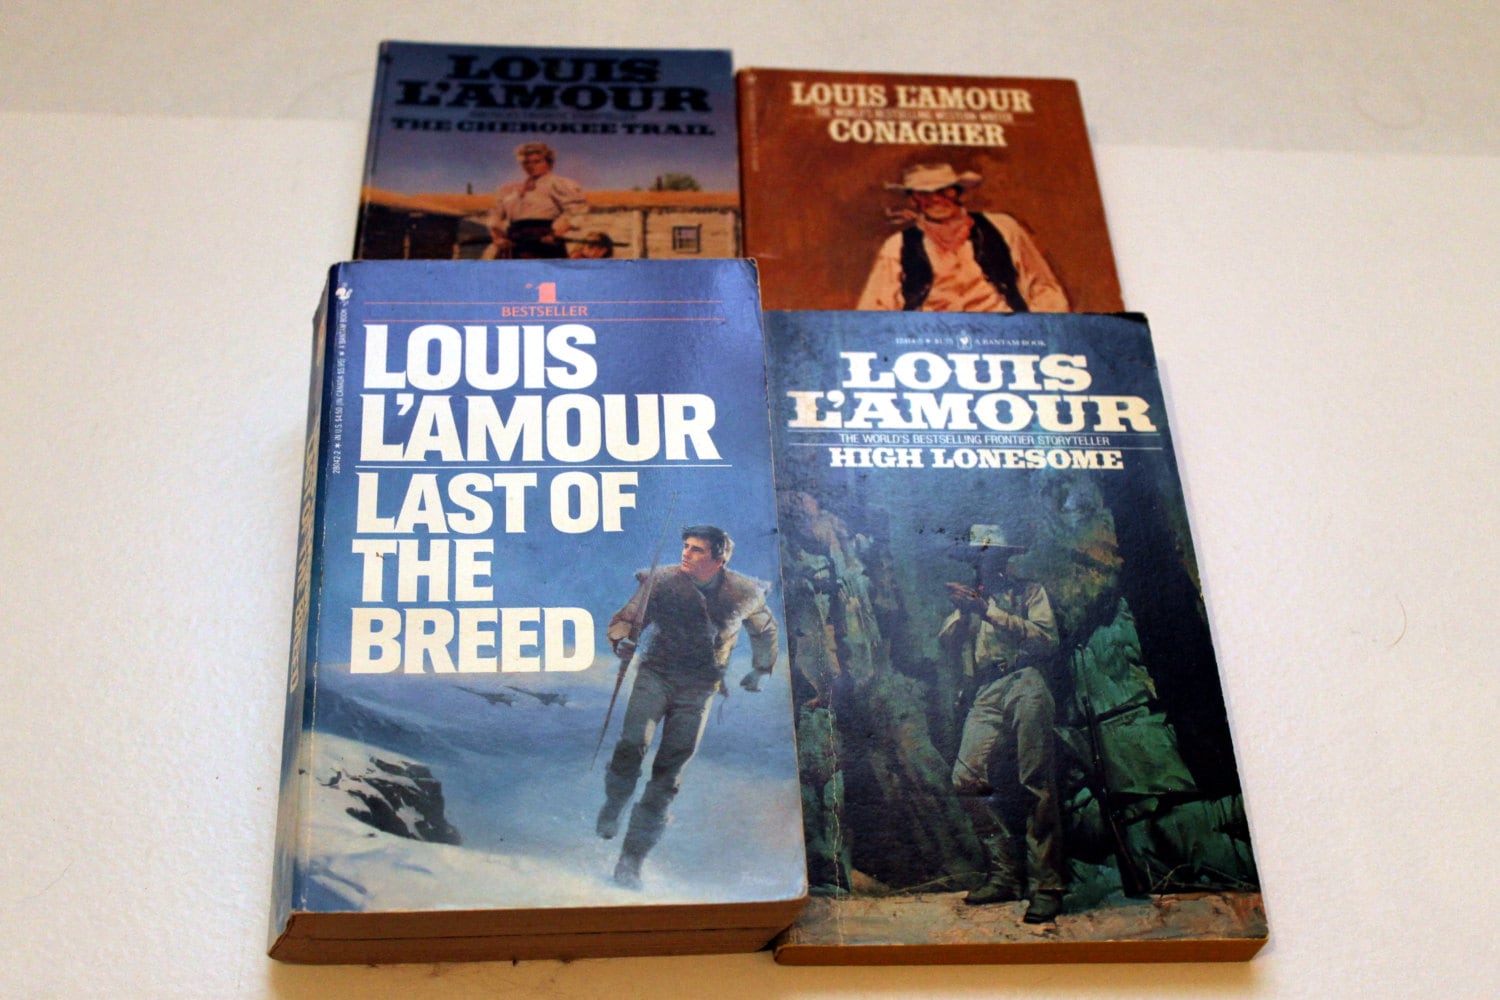 Last of the Breed by Louis L